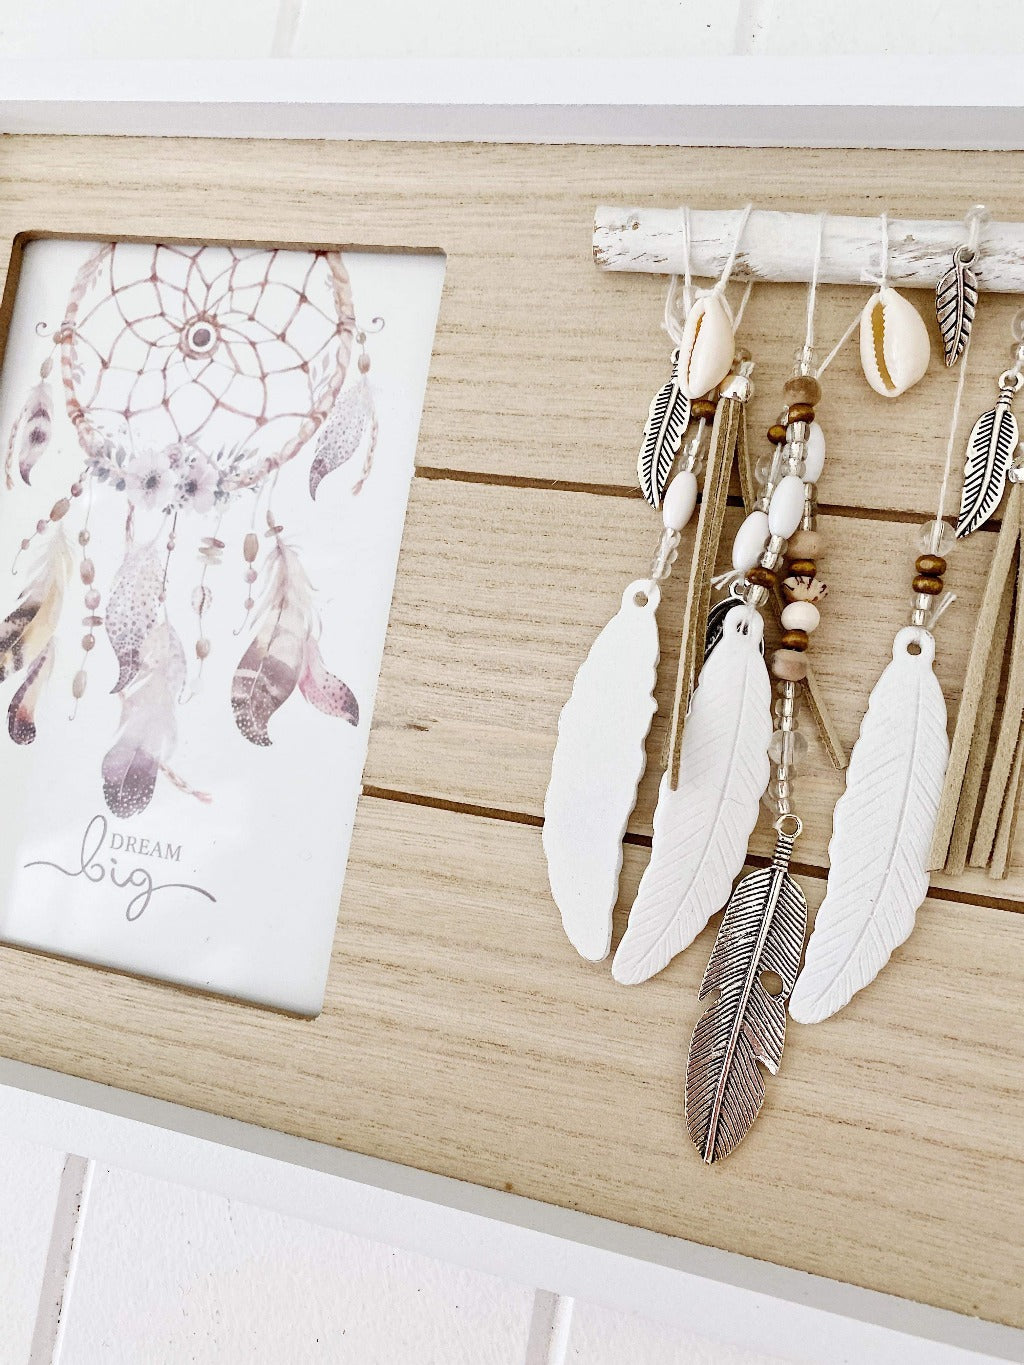 Our Twin Dreamcatcher Framed Print makes a great styling accessory for your bedroom, lounge room or office, bringing a bohemian vibe into your space. Measures approx: 40x21cm. Shop online. AfterPay available. Australia wide Shipping | Bliss Gifts & Homewares - Unit 8, 259 Princes Hwy Ulladulla - 0427795959, 44541523